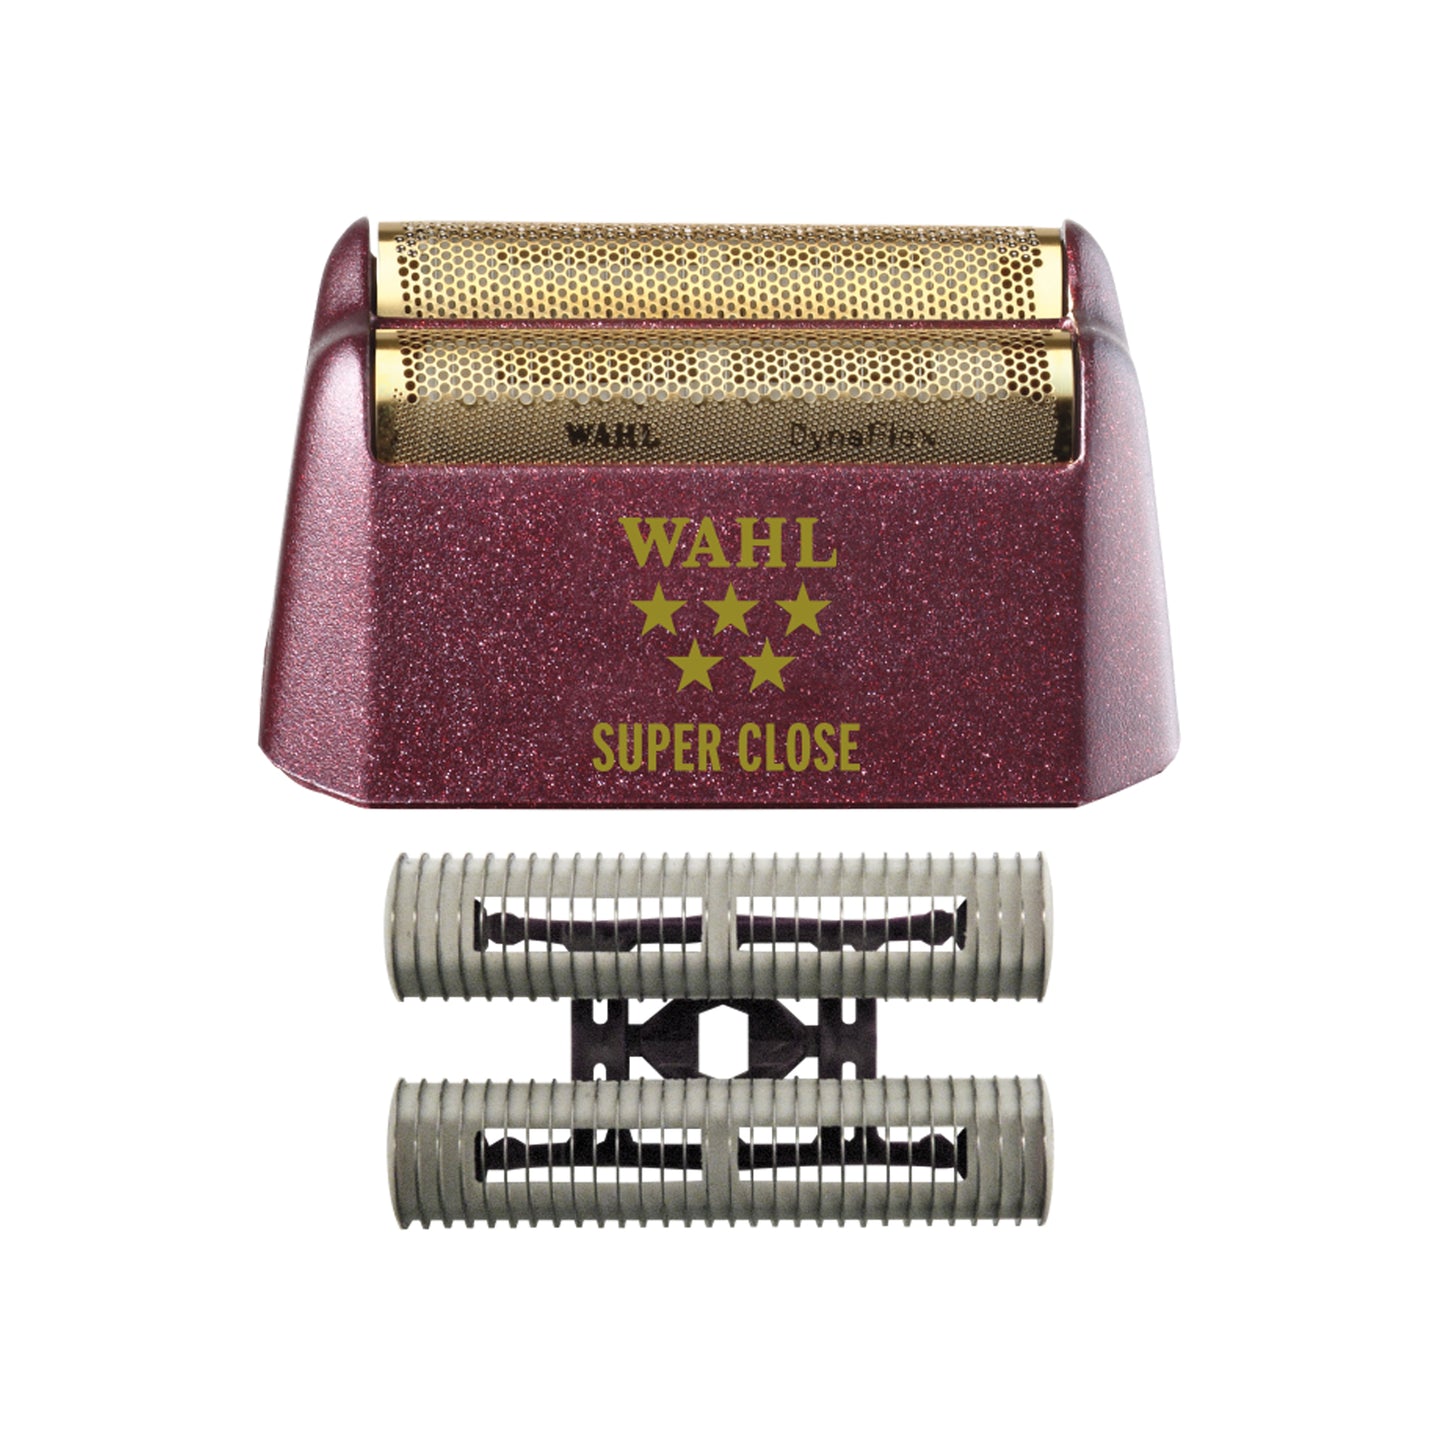 Wahl 5-Star Shaver Replacement Foil & Cutter Assembly